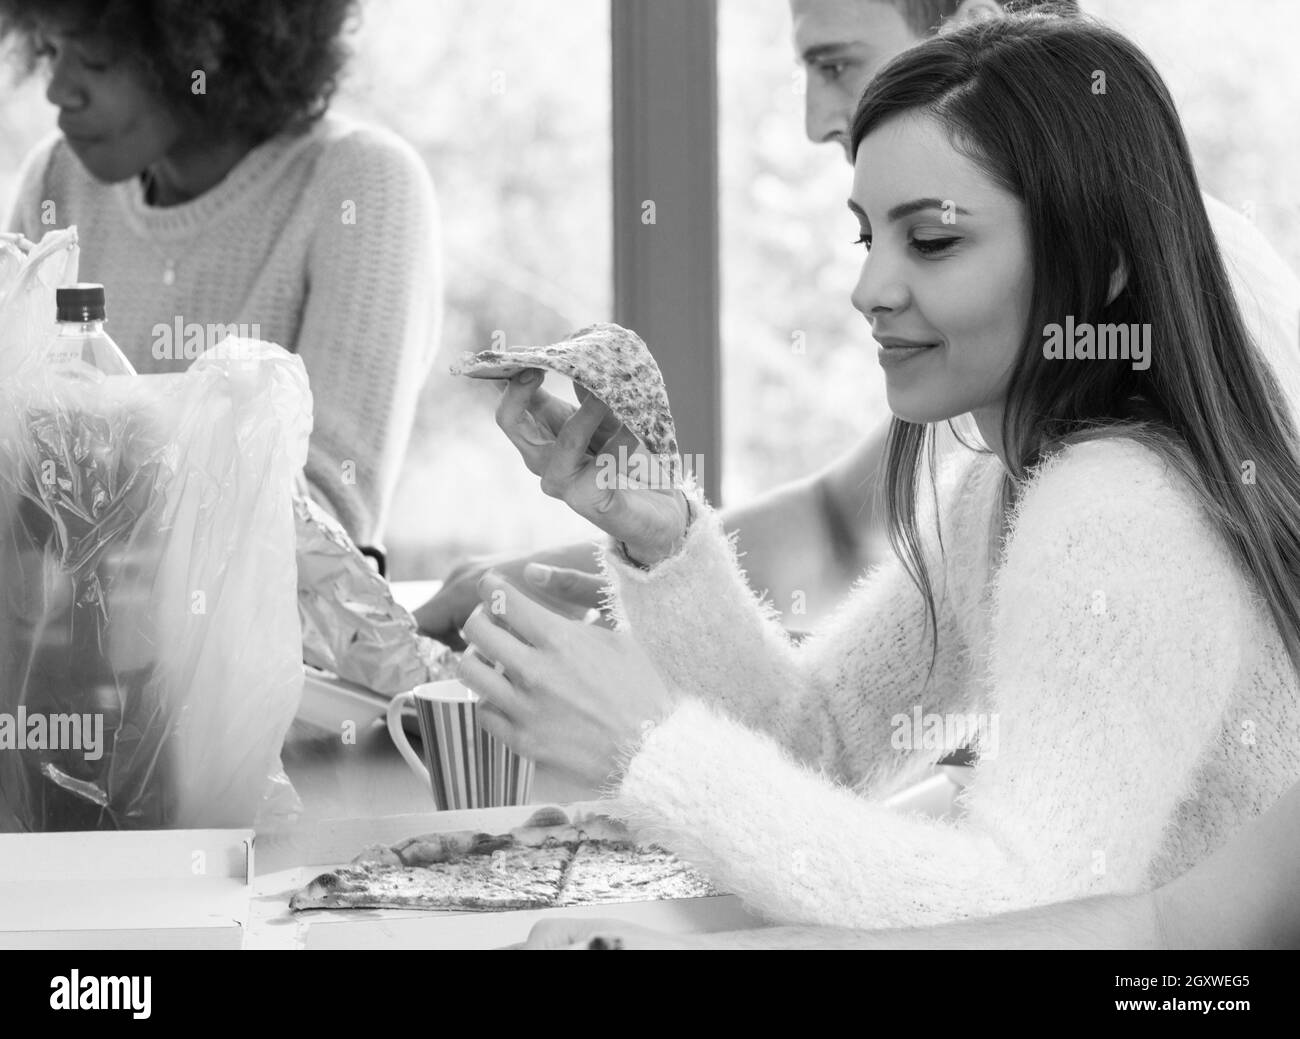 Young girl eating delicious pizza Stock Photo